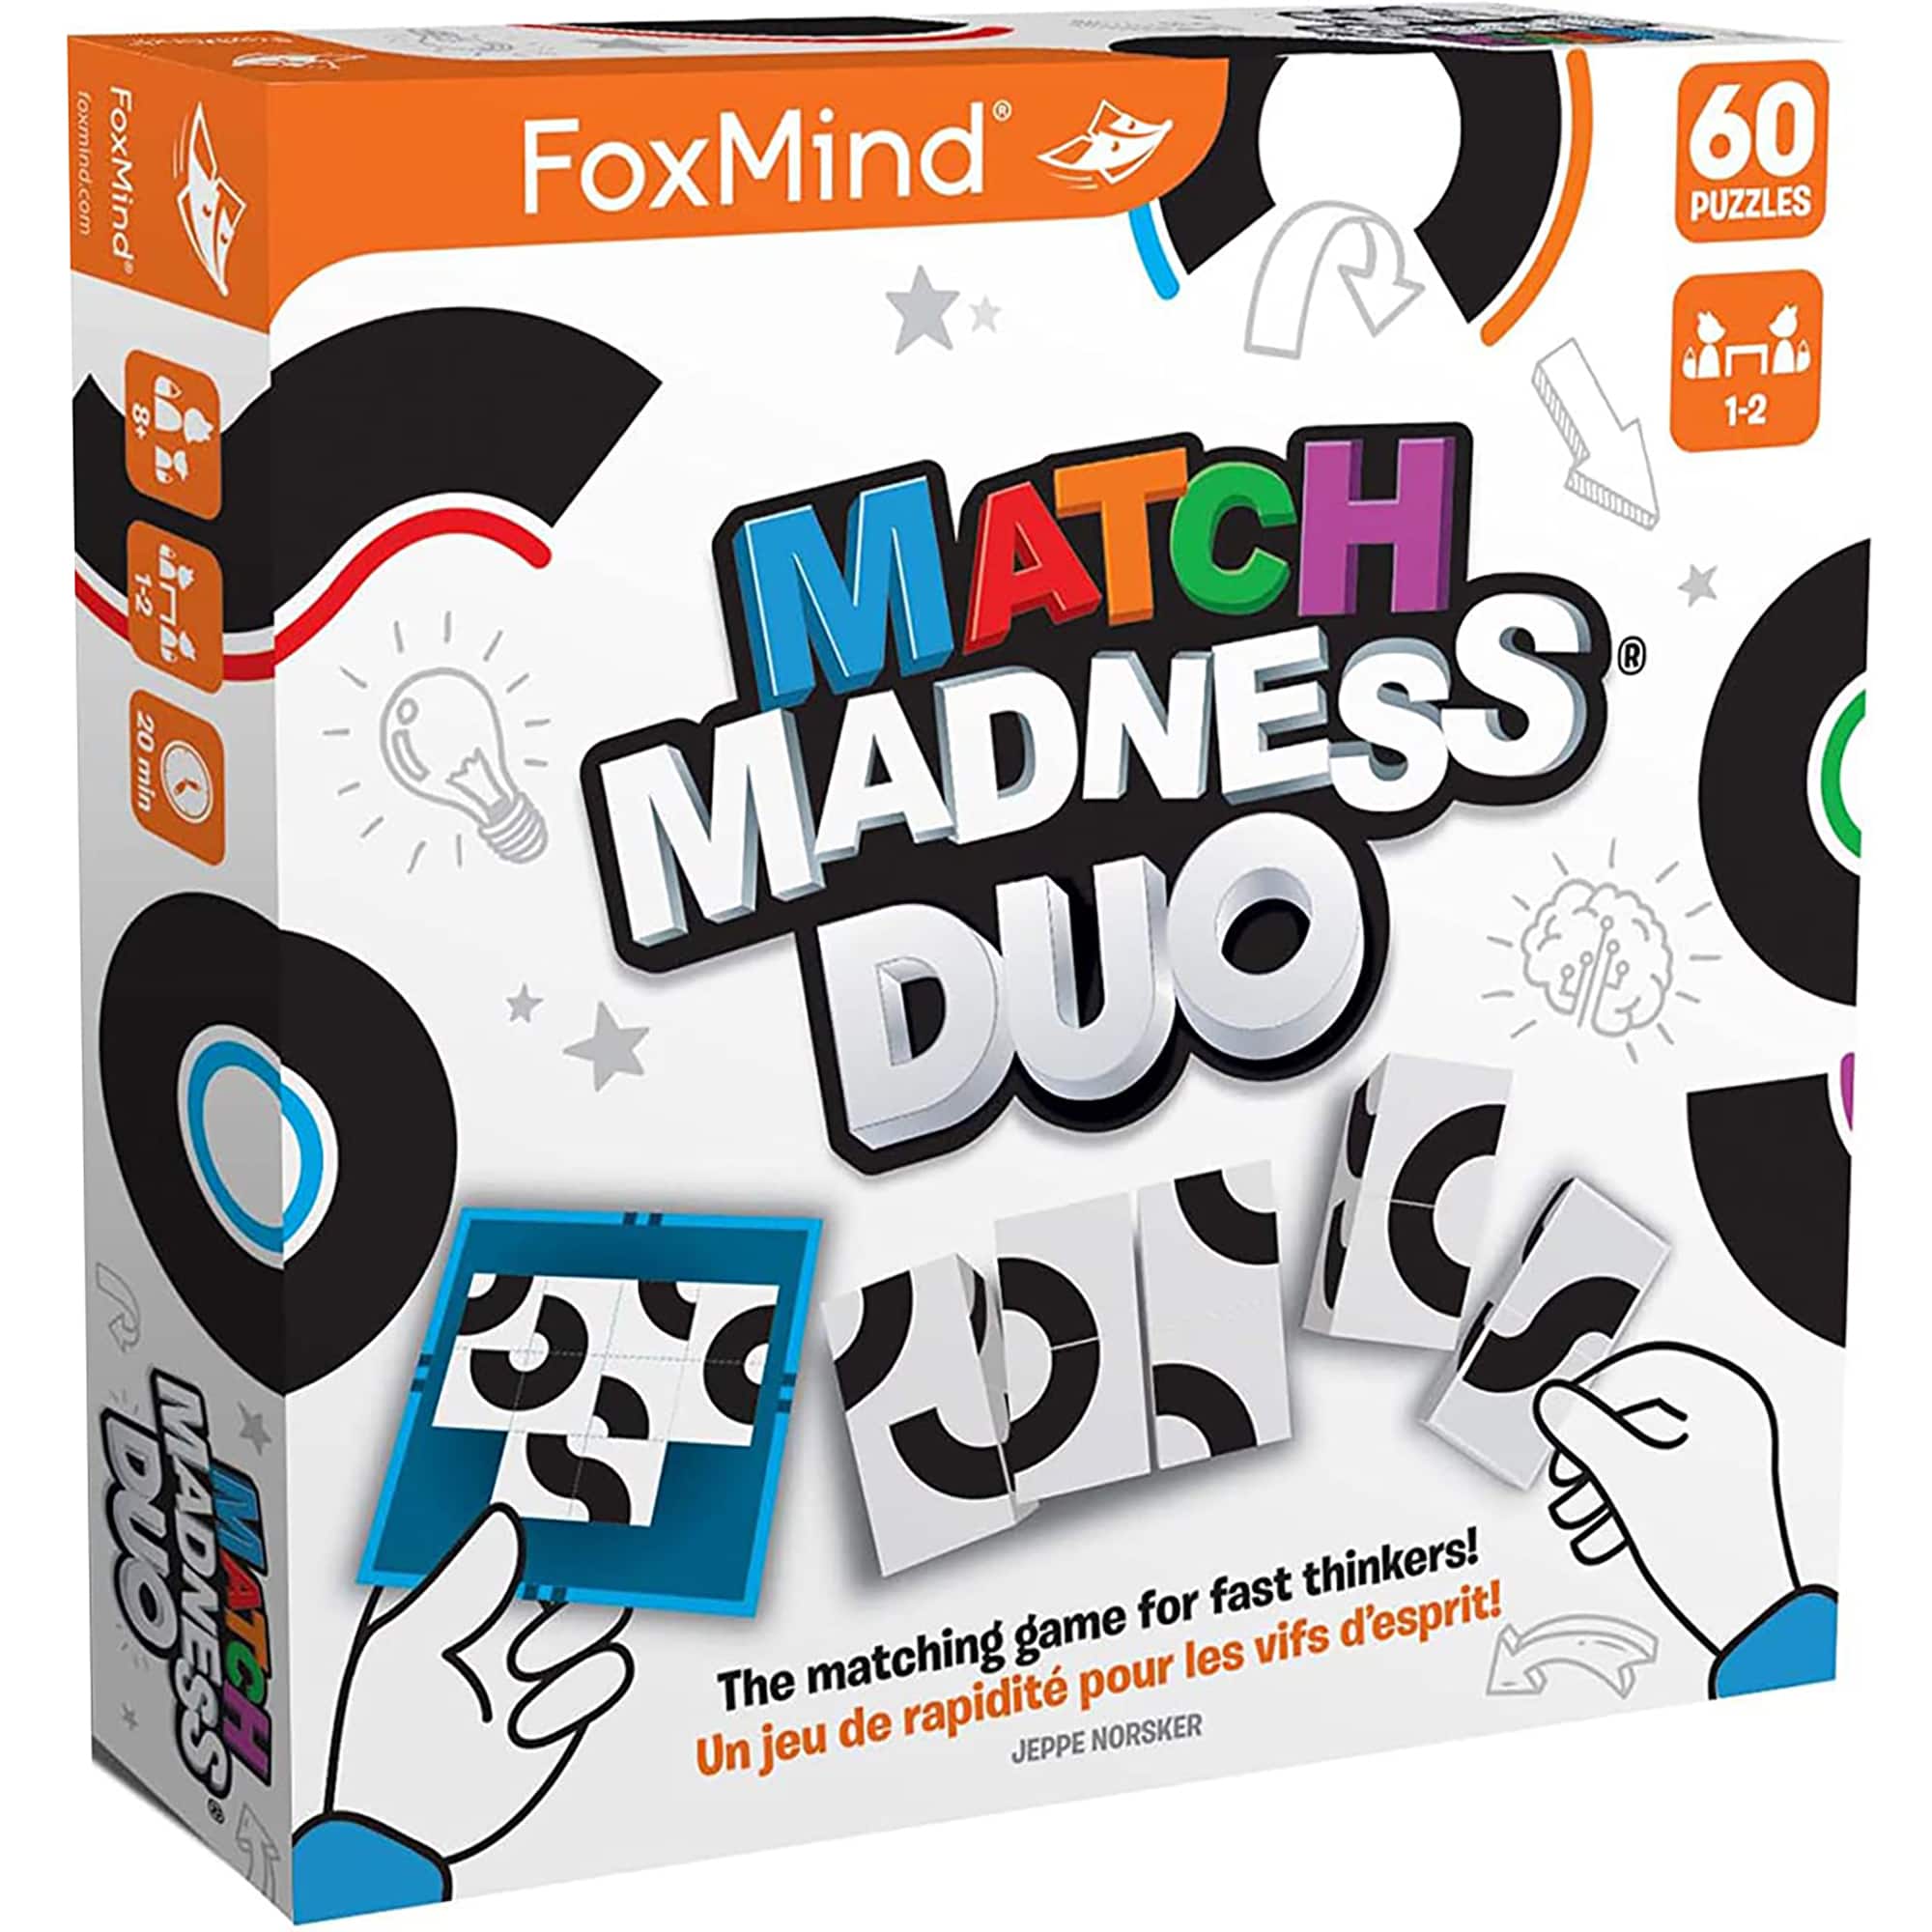 FoxMind Games Match Madness Duo